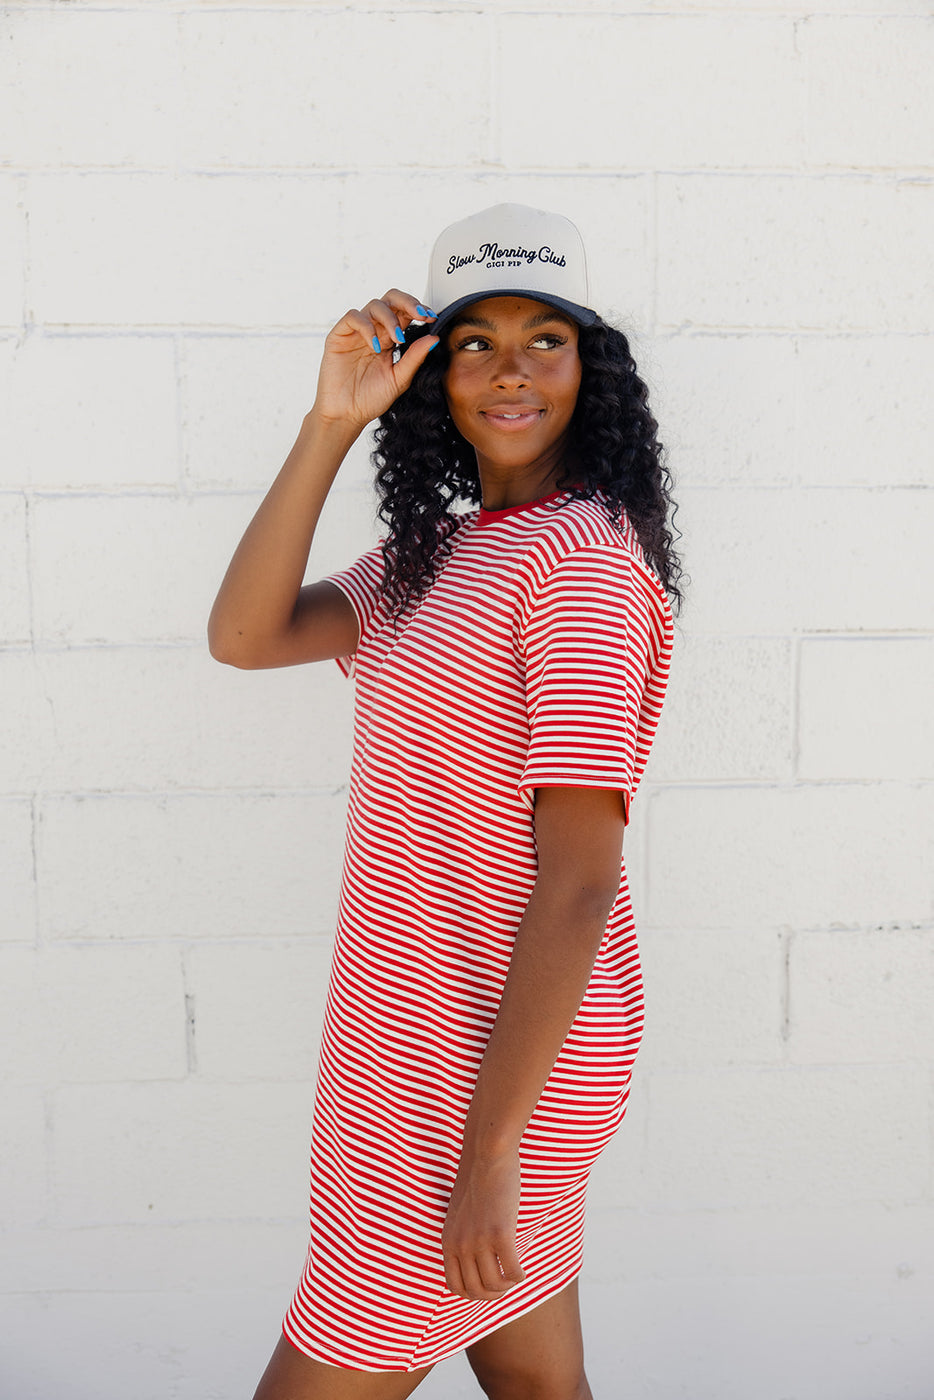 a woman in a red and white striped shirt and white hat